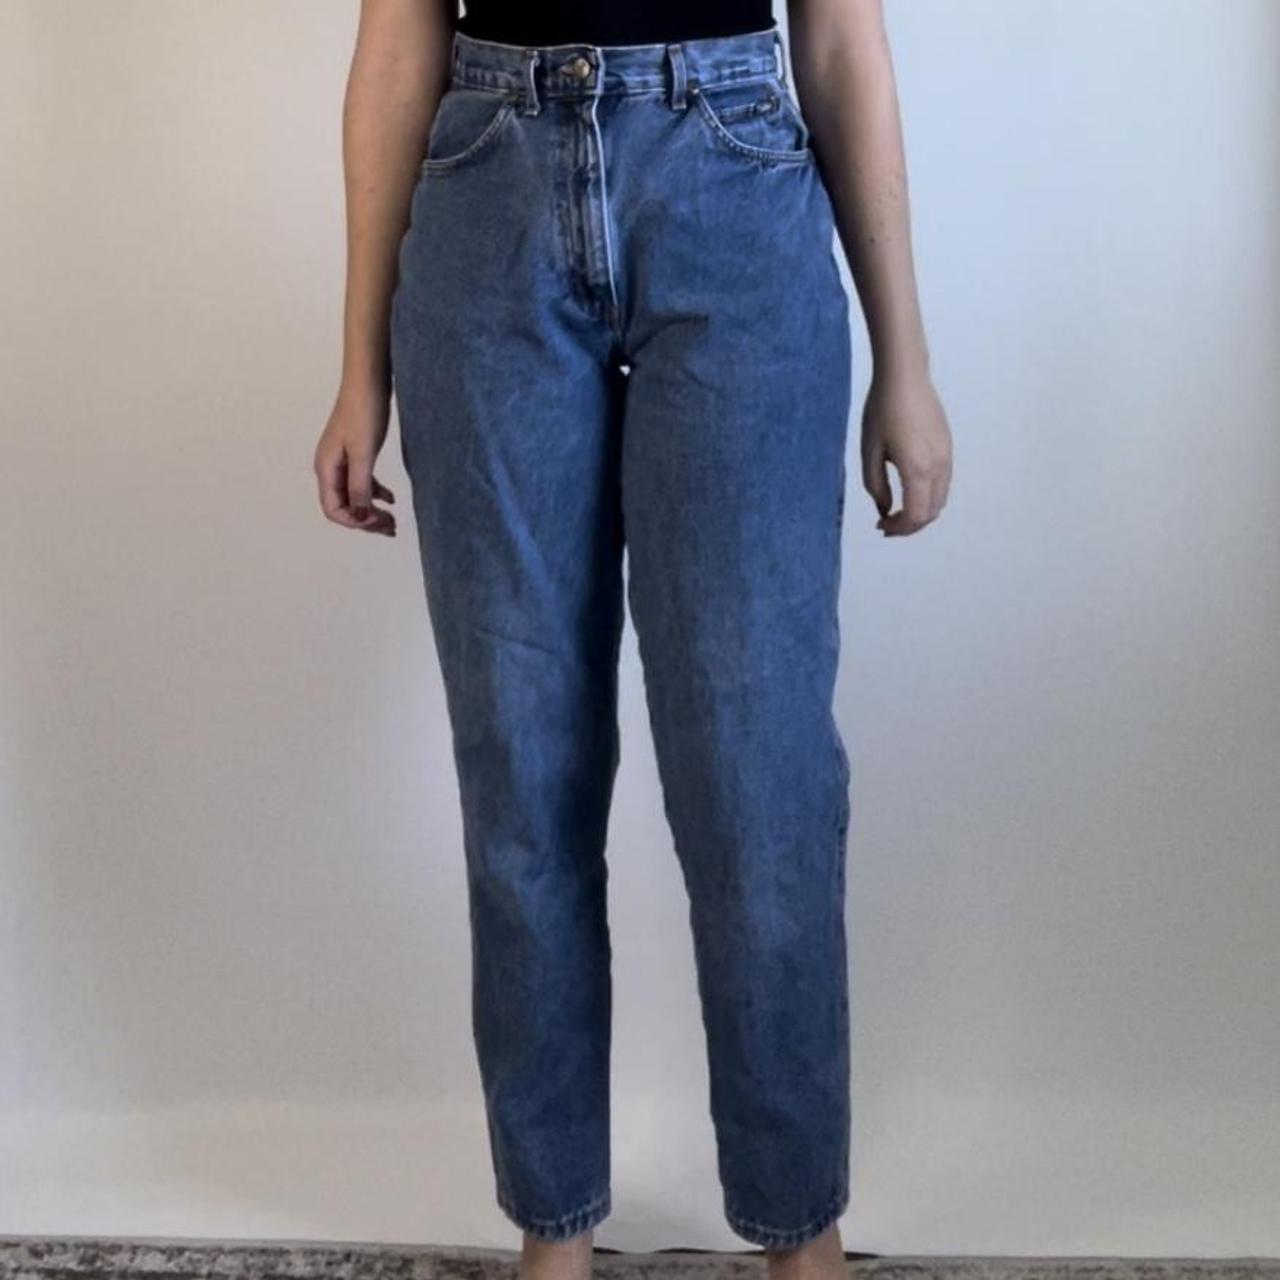 Chic Women's Blue and Navy Jeans (3)